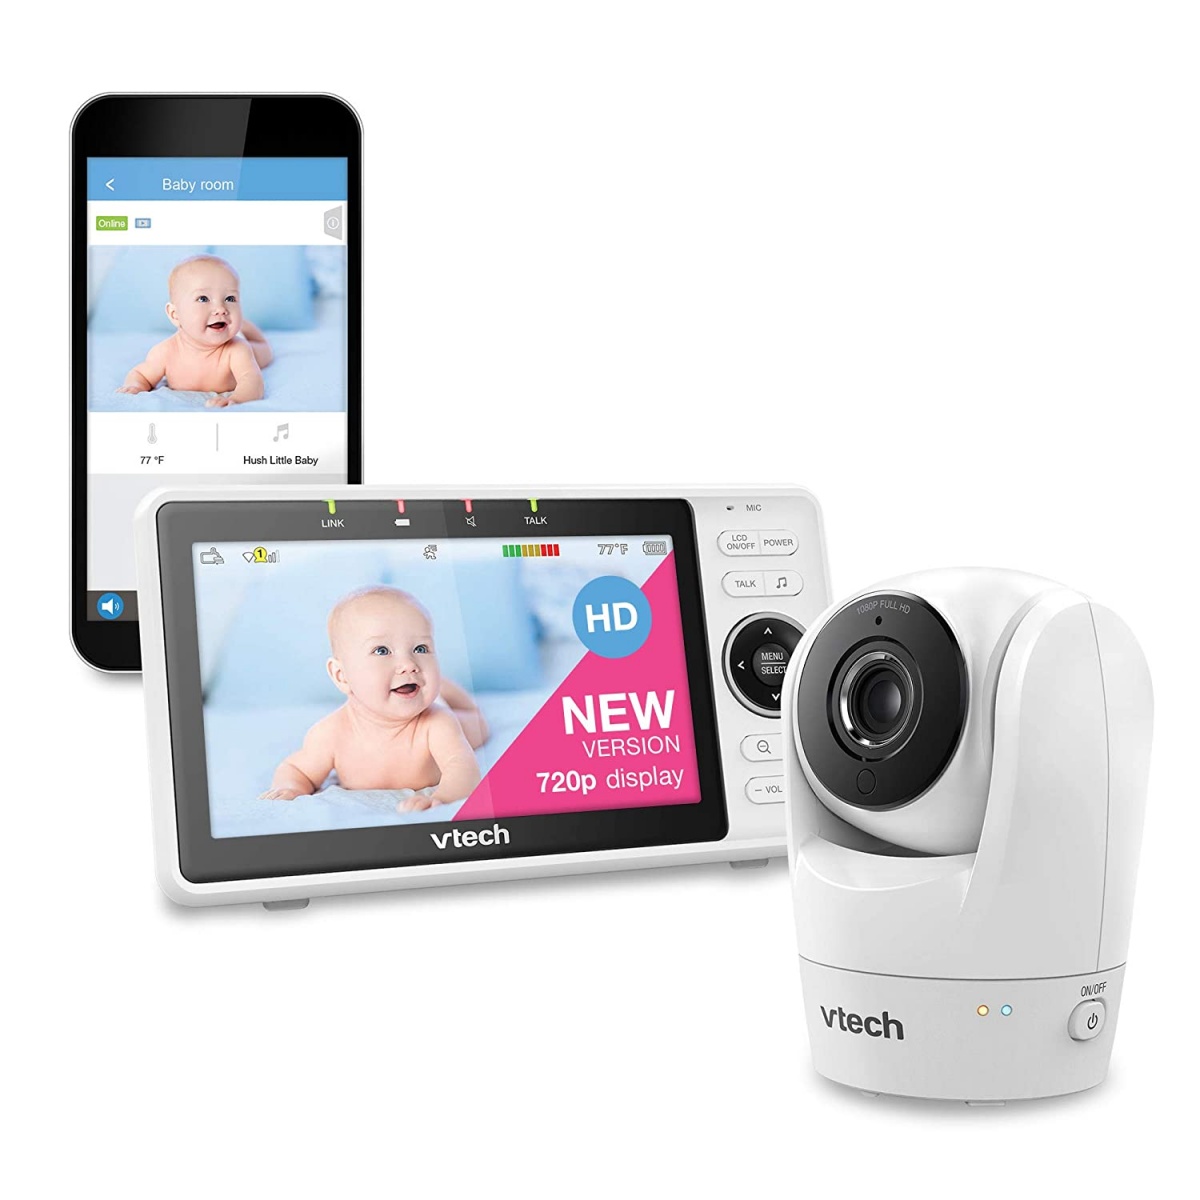 VTech VM991 Safe & Sound Expandable HD Video Baby Monitor Review